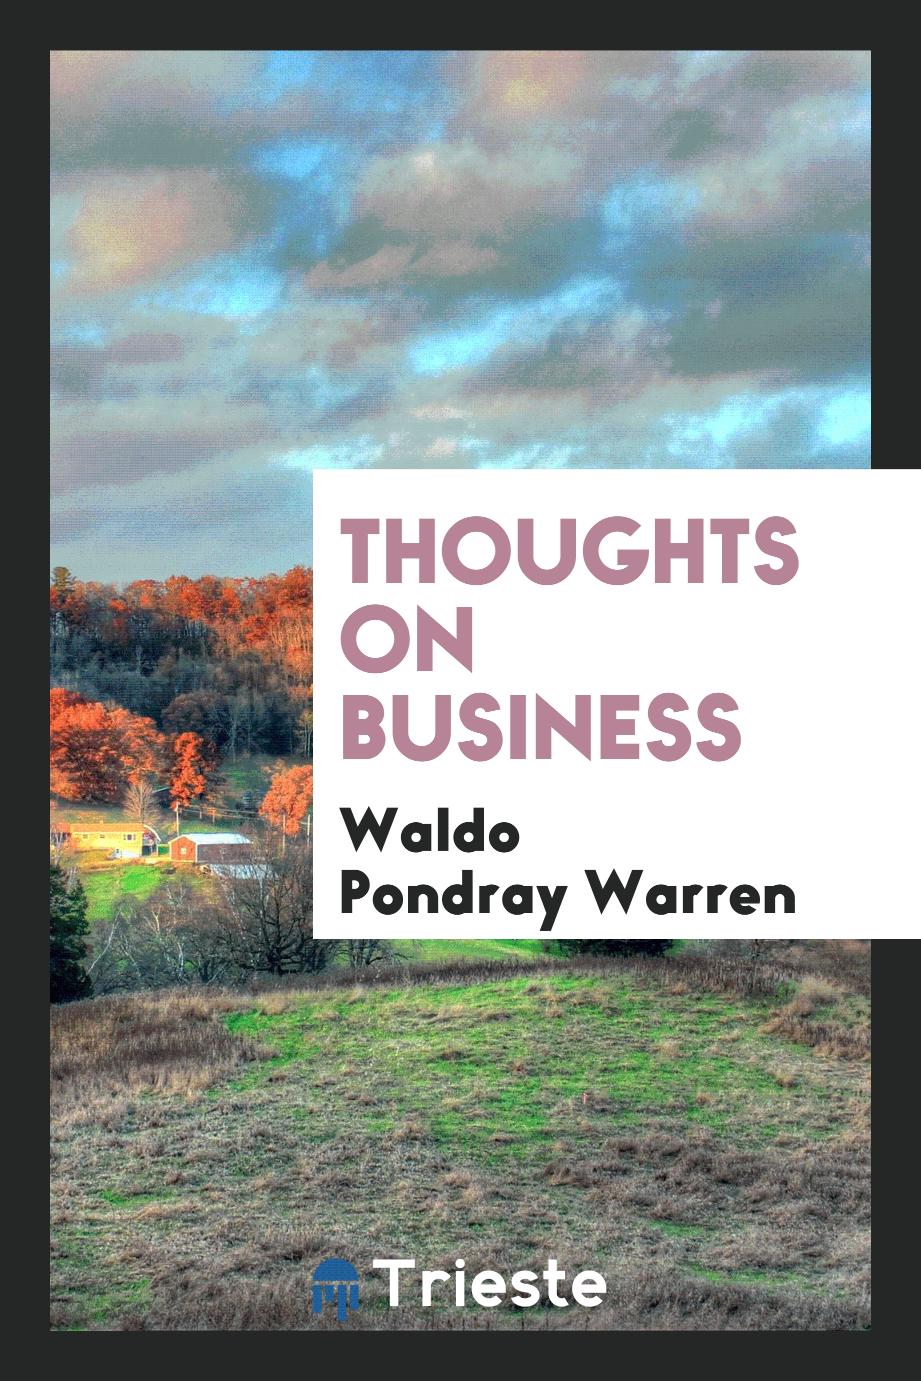 Thoughts on business